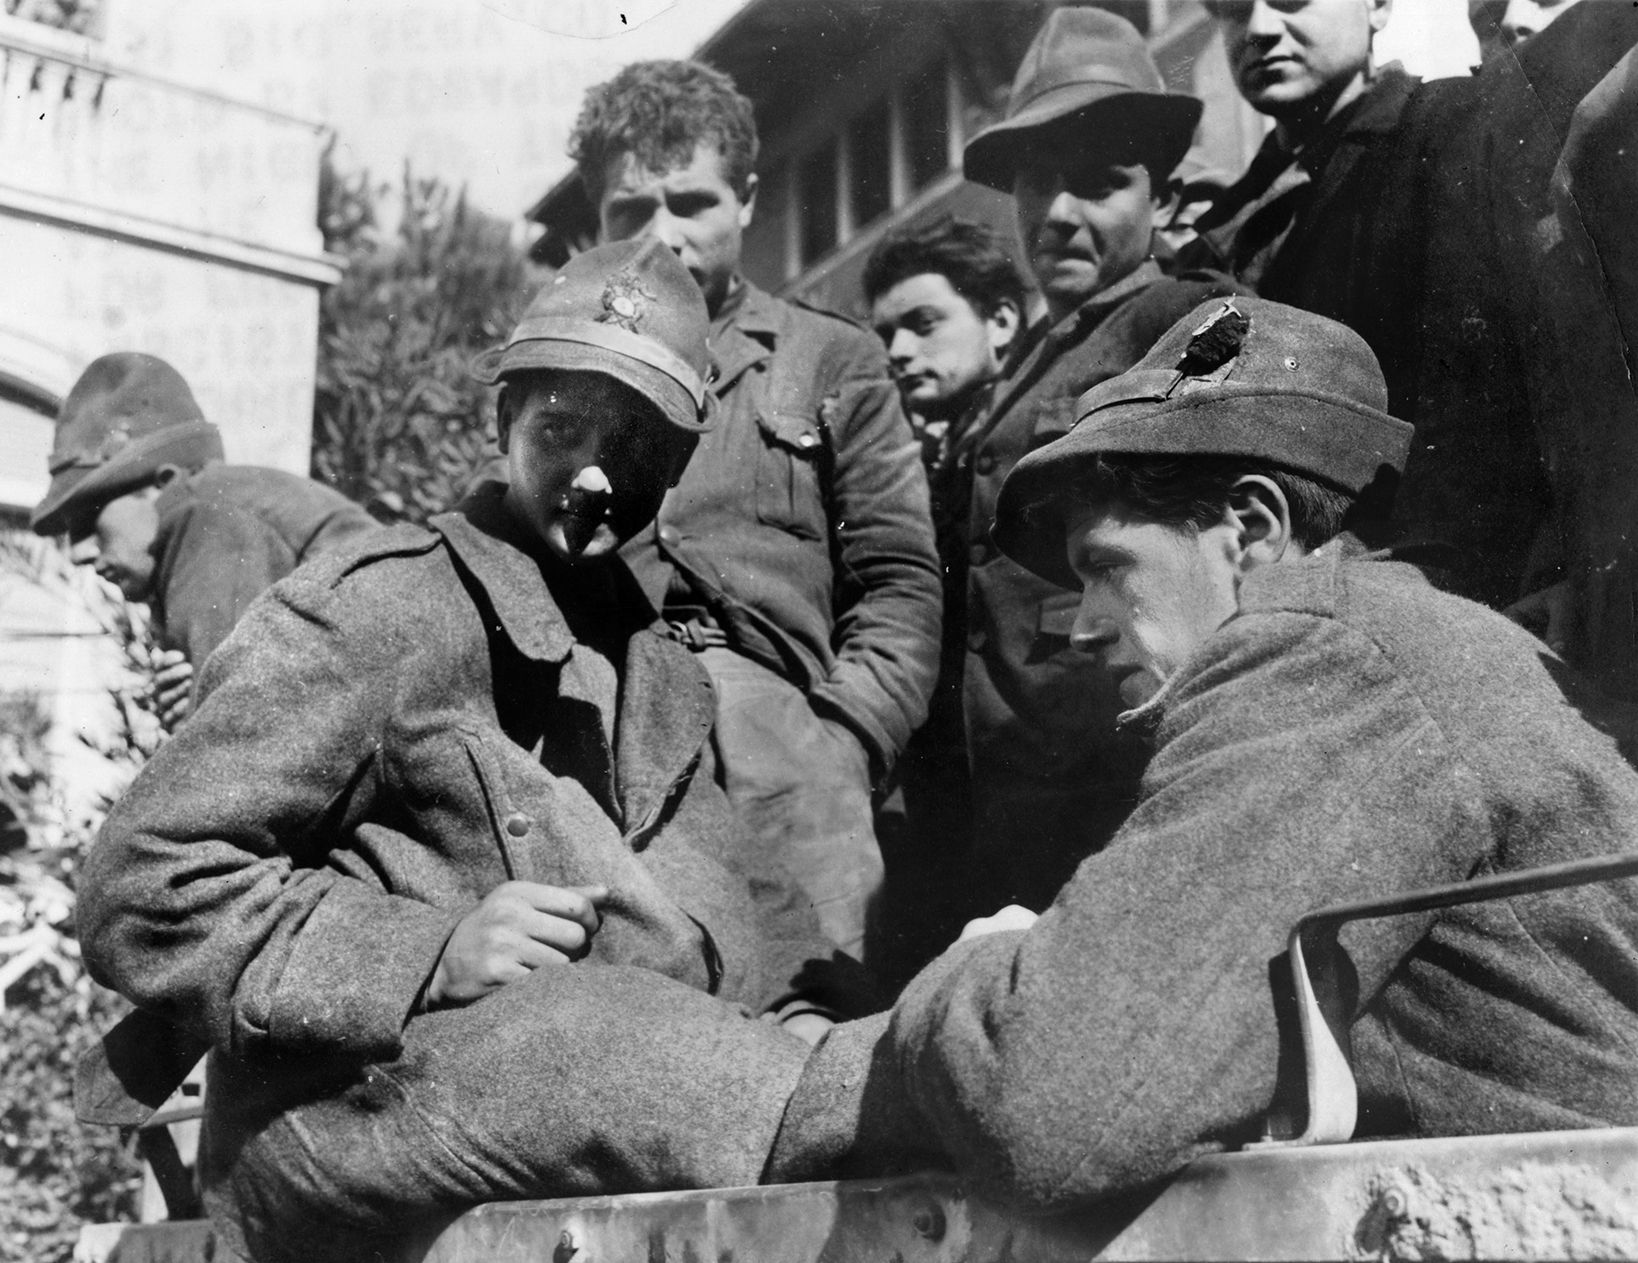 Young POWs from the Monte Rosa Division appear to be relieved at having deserted from their unit. They wear distinctive “alpini” hats common to Italian mountain troops.